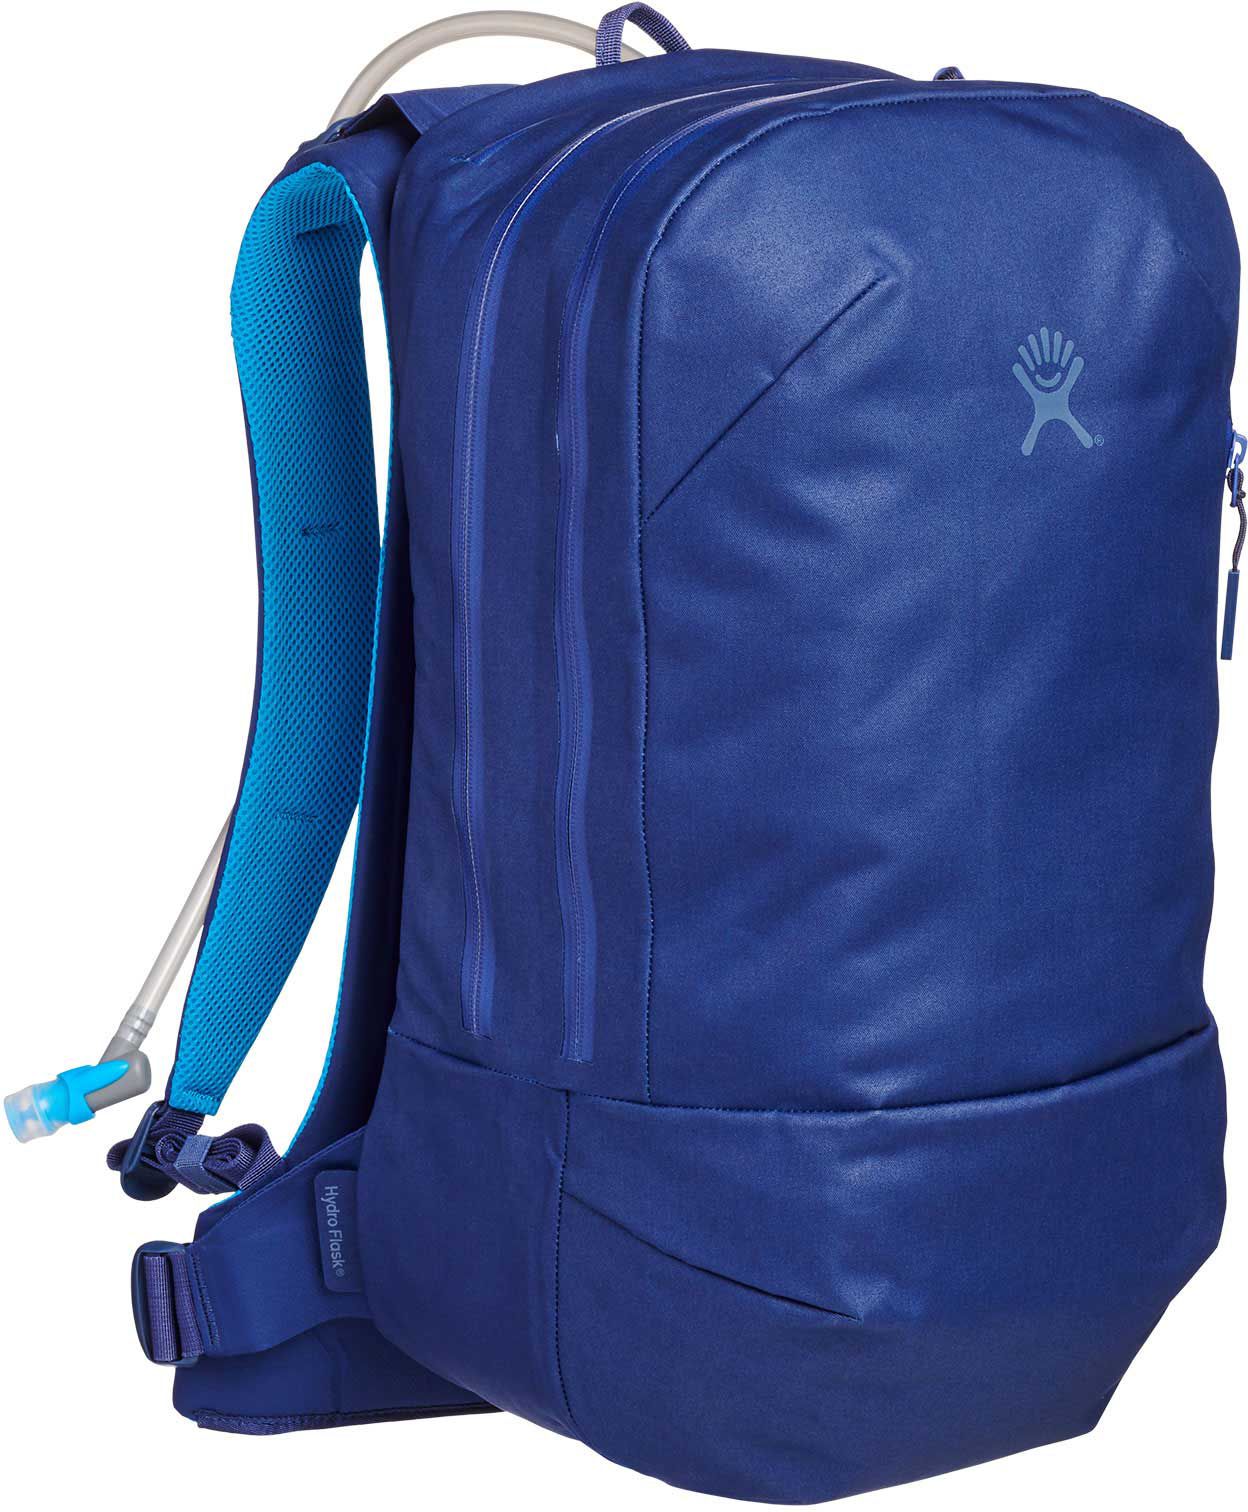 hydro flask hydration pack